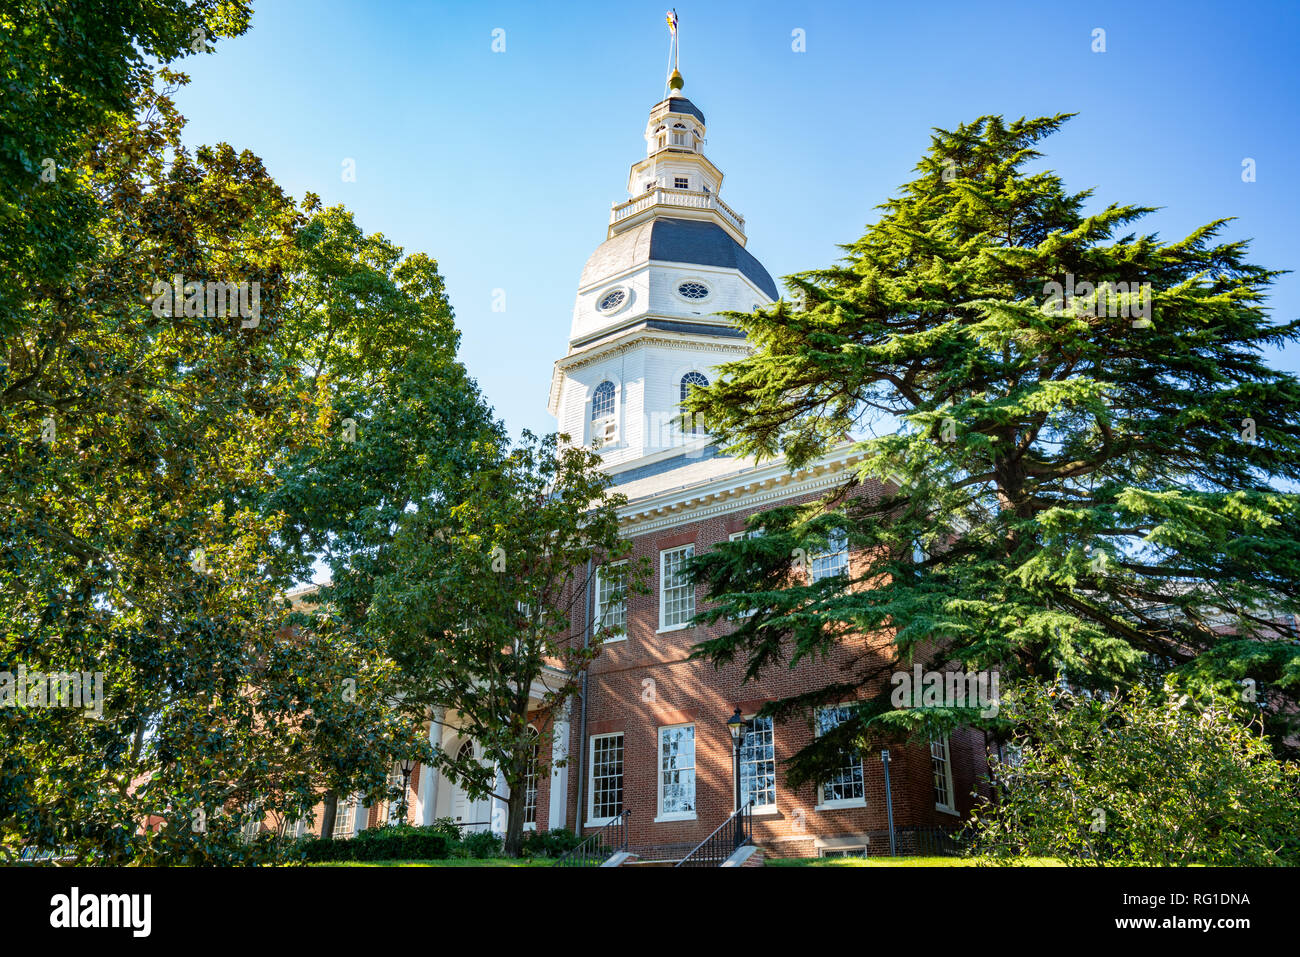 Maryland State Capital Building in Annapolis, Maryland Stockfoto